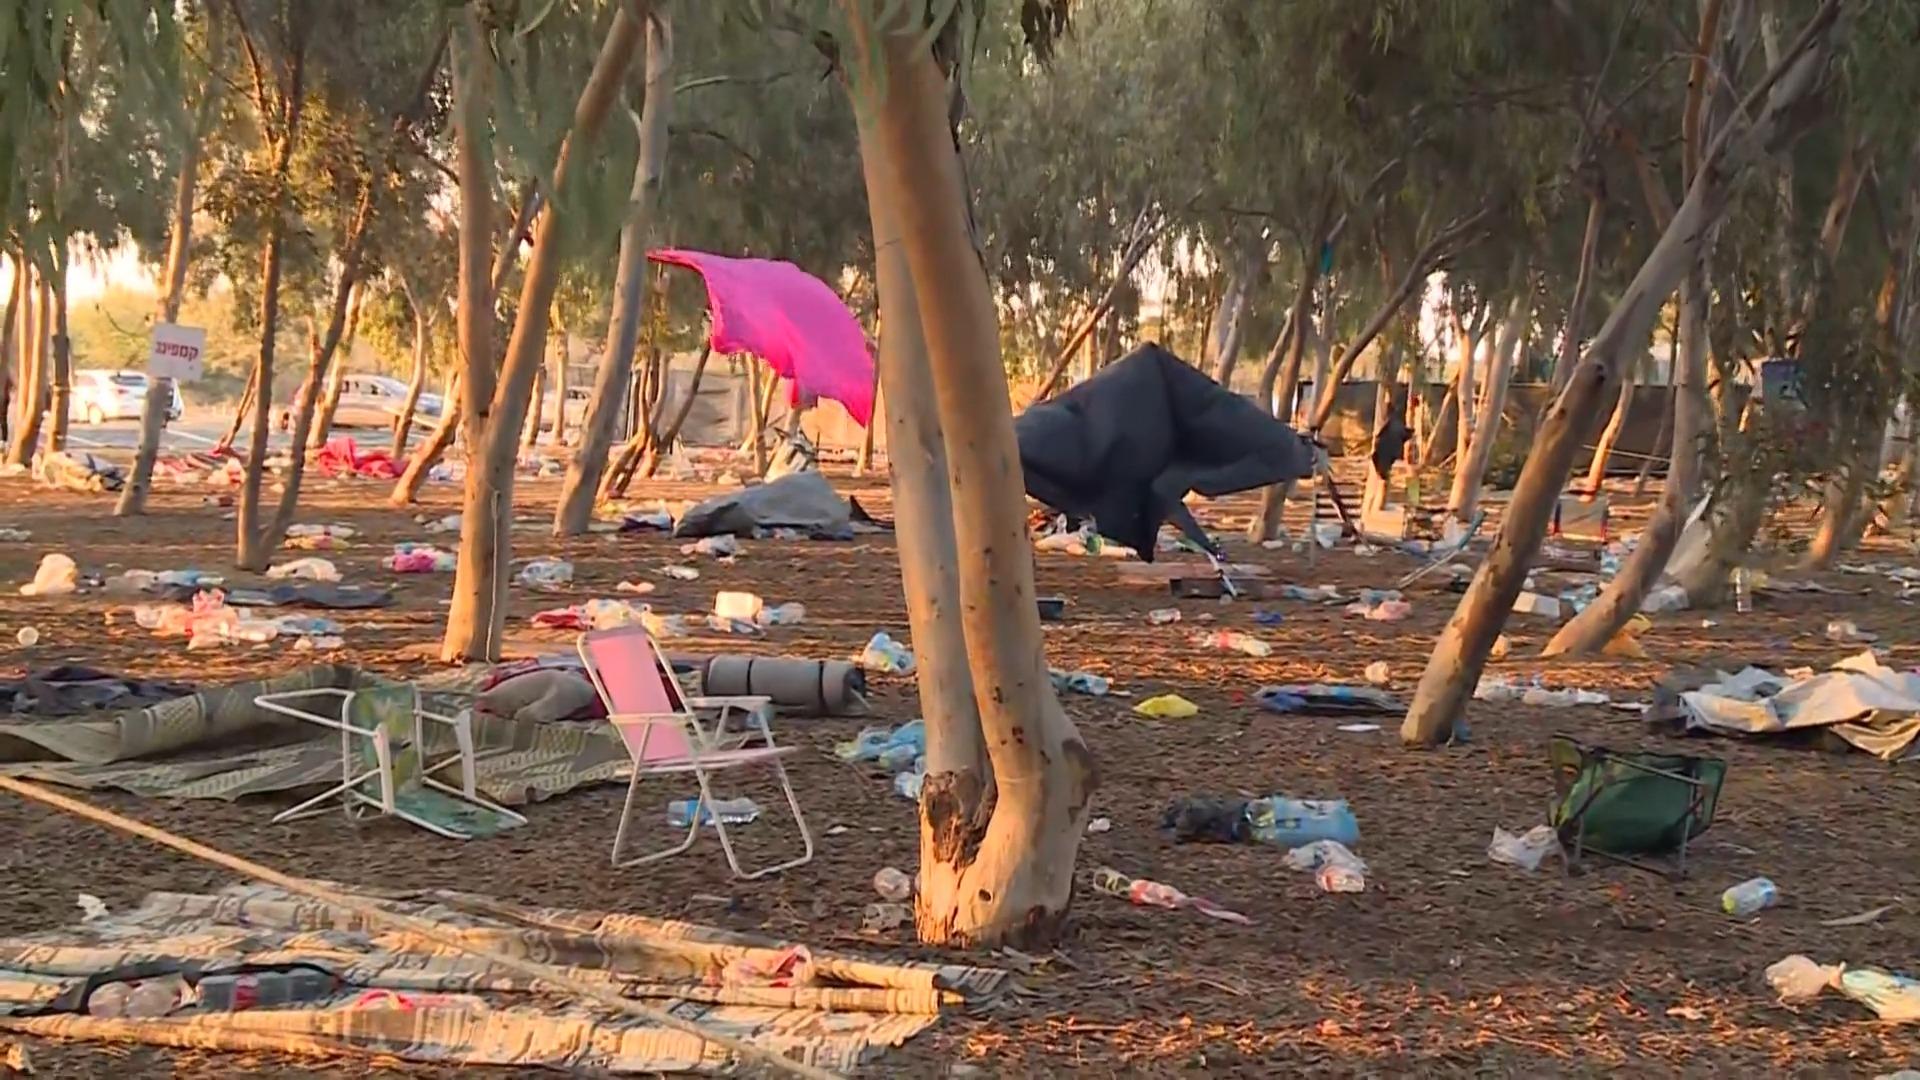 This is what the festival site looks like in Israel's current situation